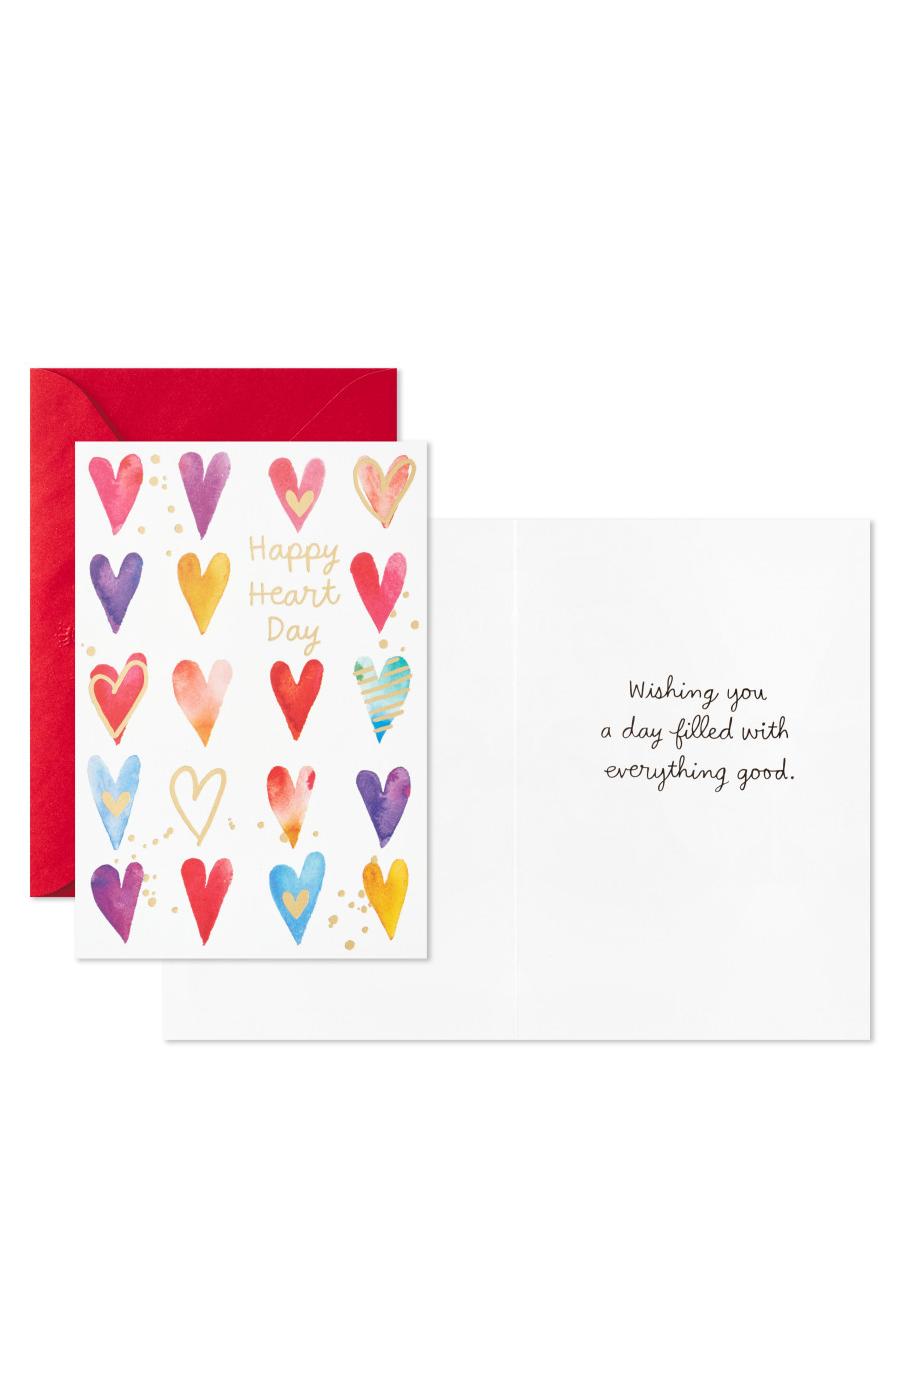 Hallmark Happy Heart Day Valentine's Cards with Envelopes - S2, S5; image 5 of 6